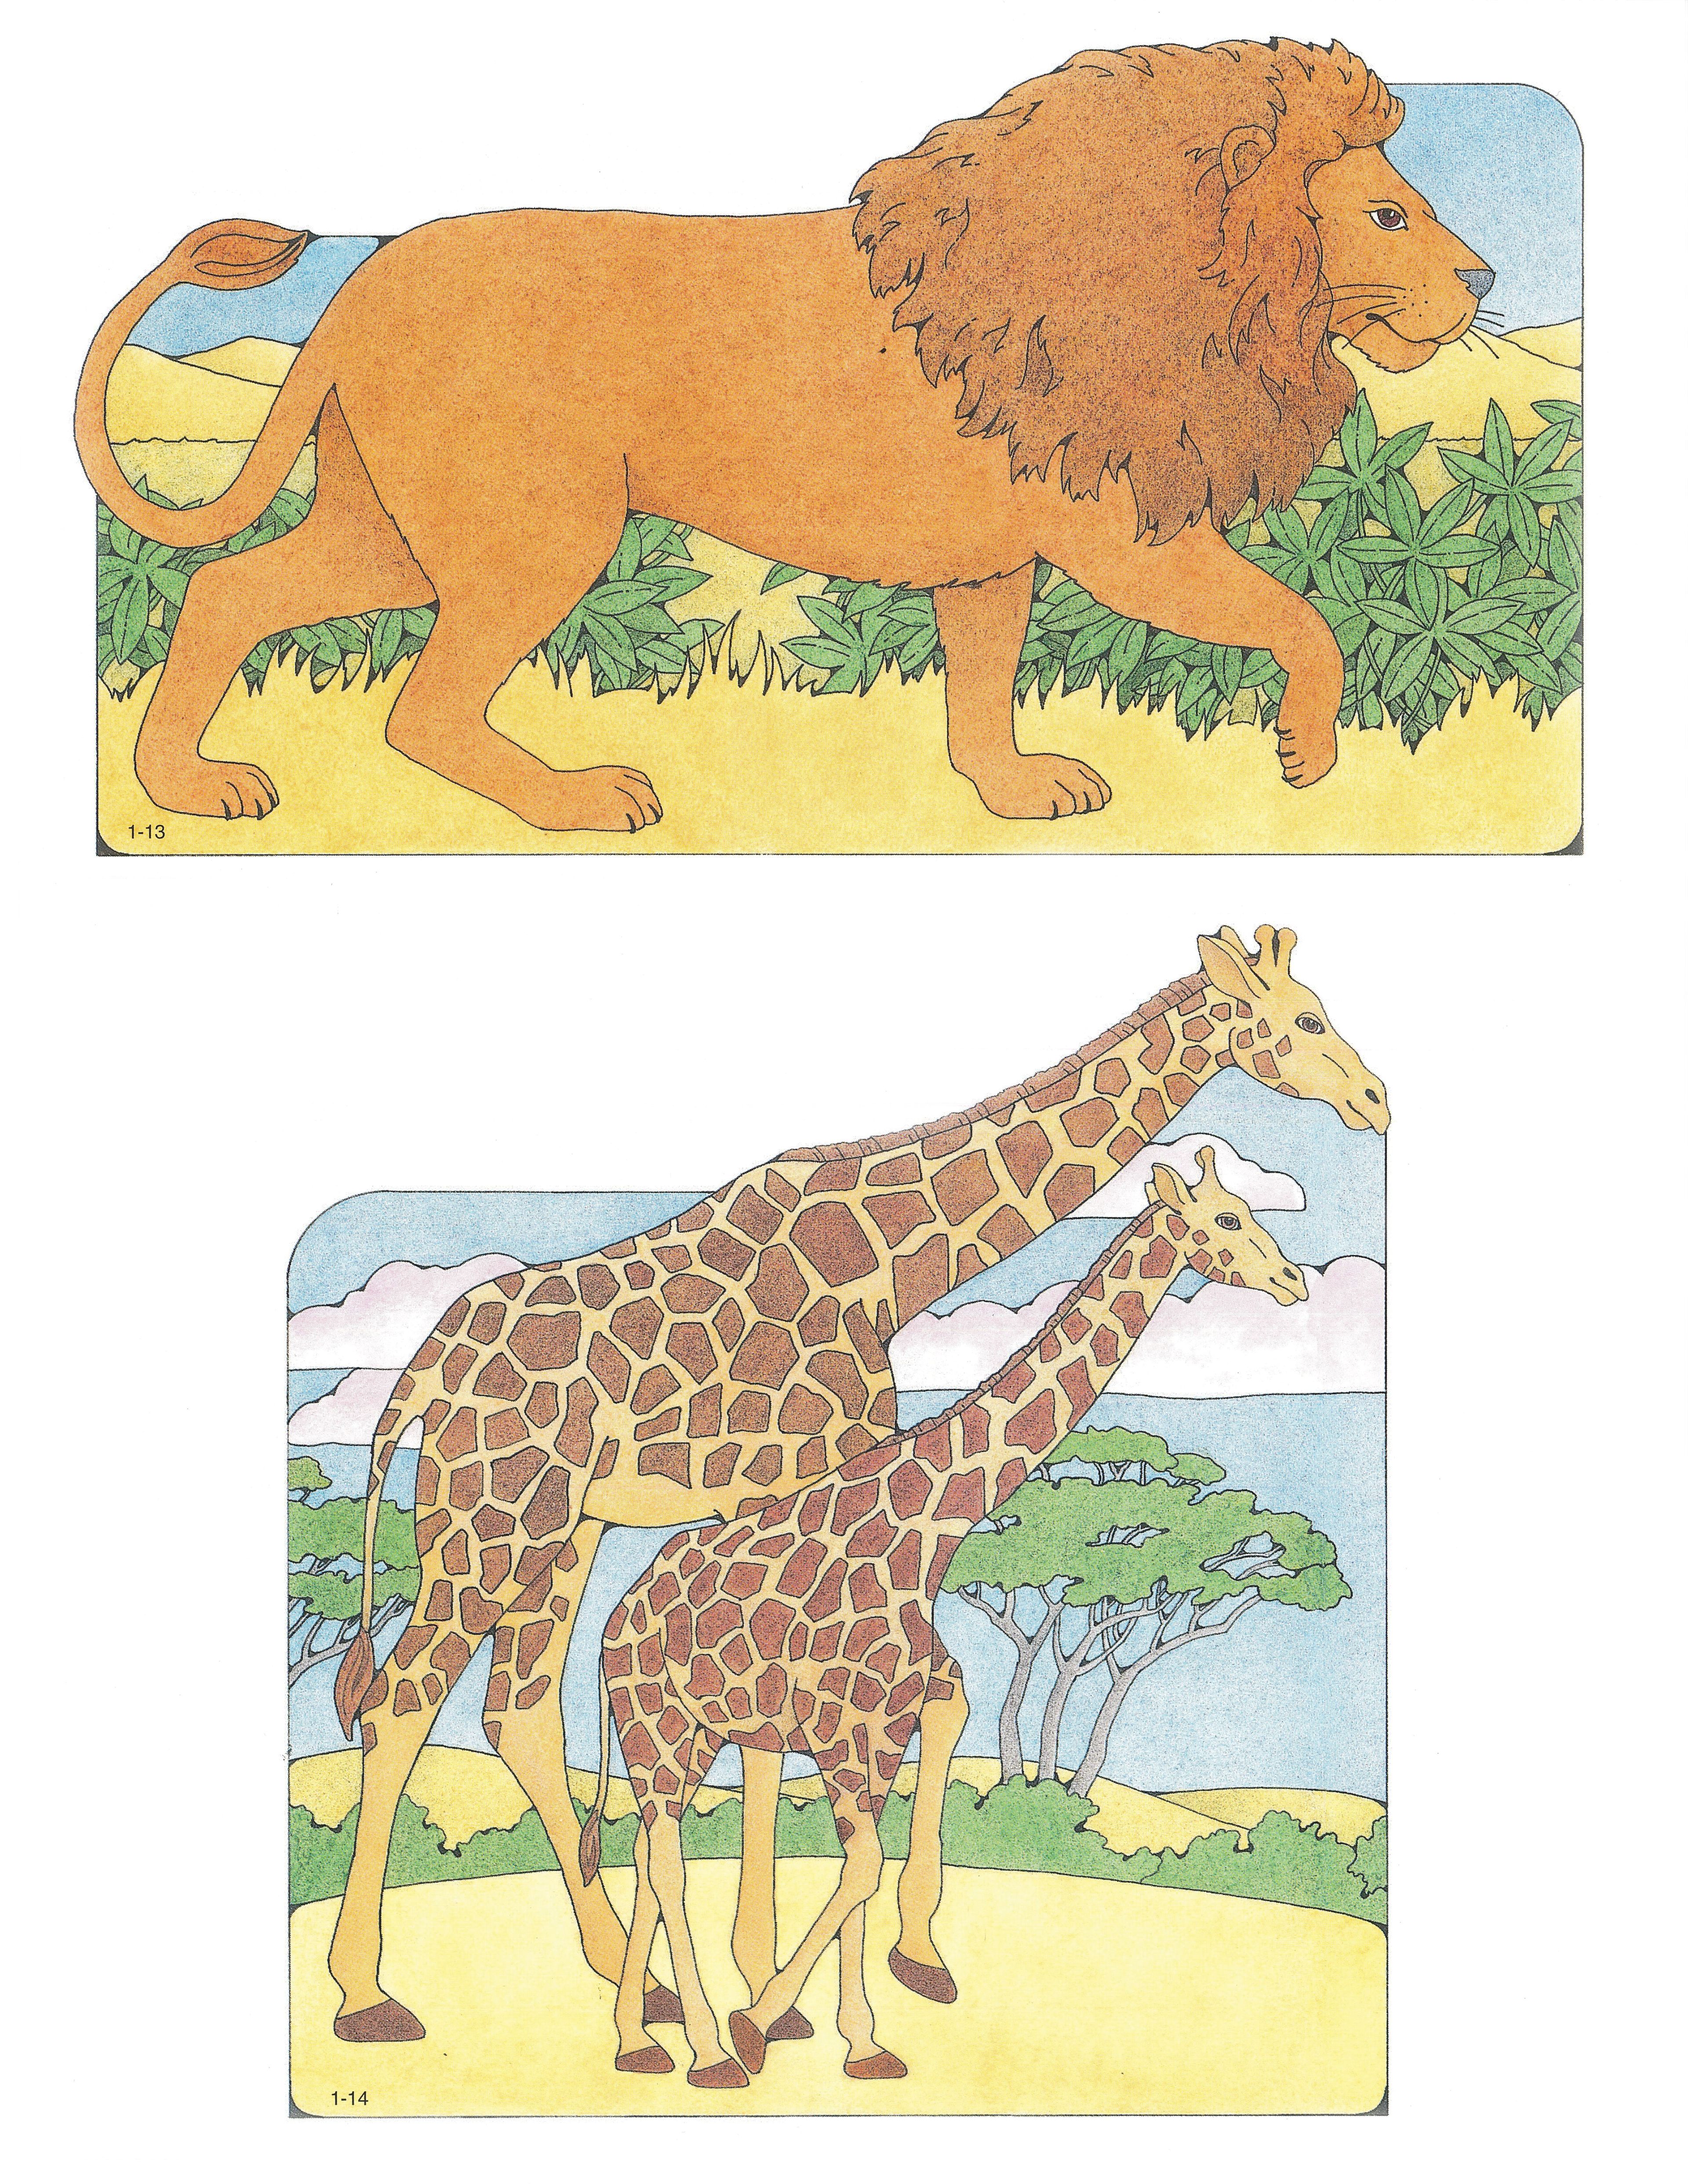 Primary 1: I Am a Child of God Cutouts 1-13, Lion; 1-14, Mother and Baby Giraffe.